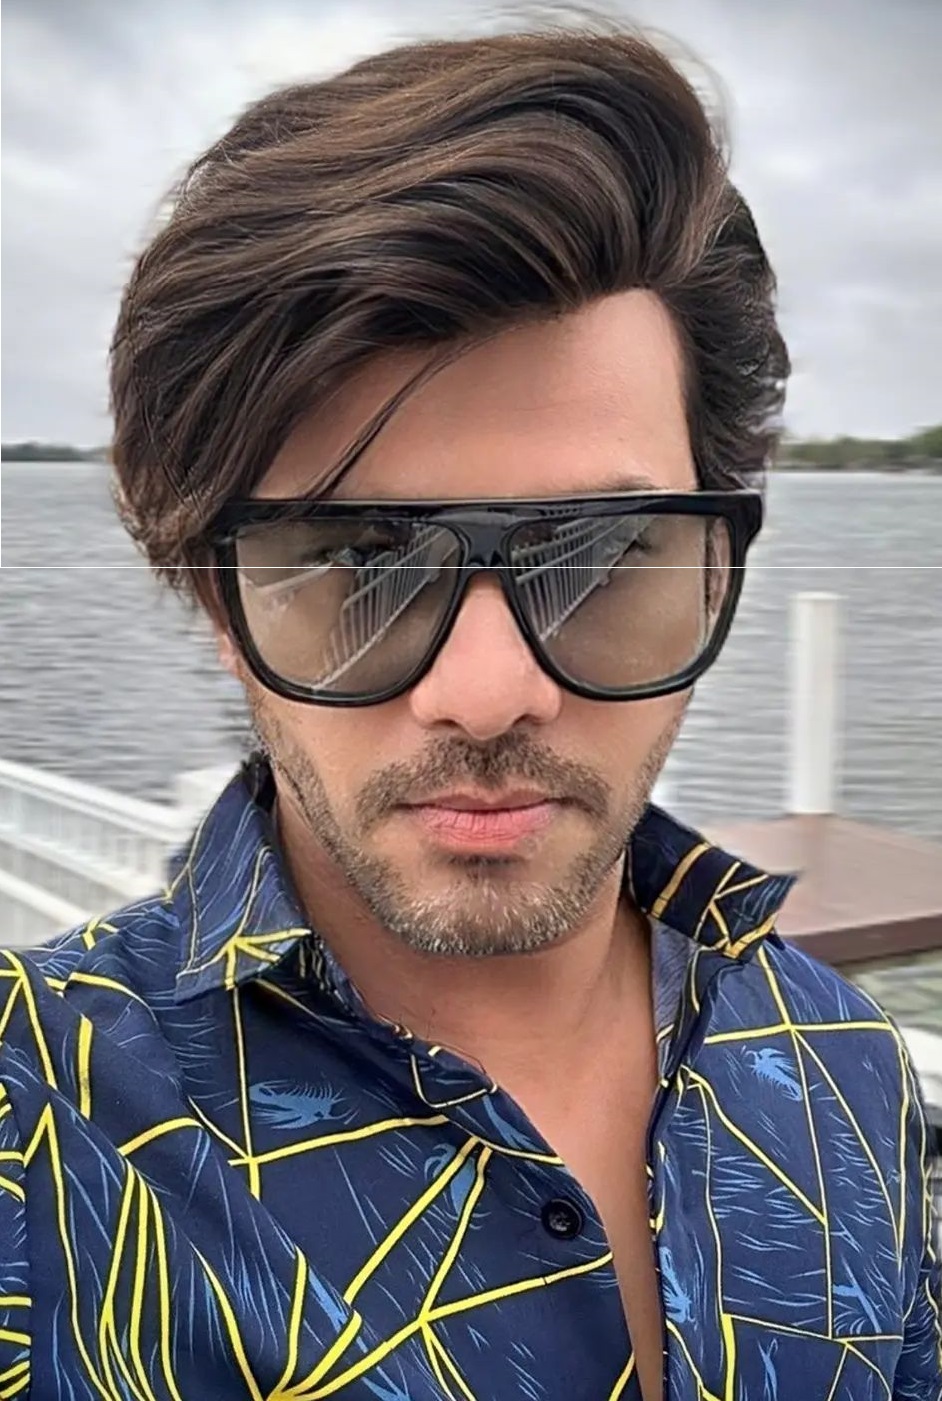 Gucci sunglasses with a shirt being a must-have product to own